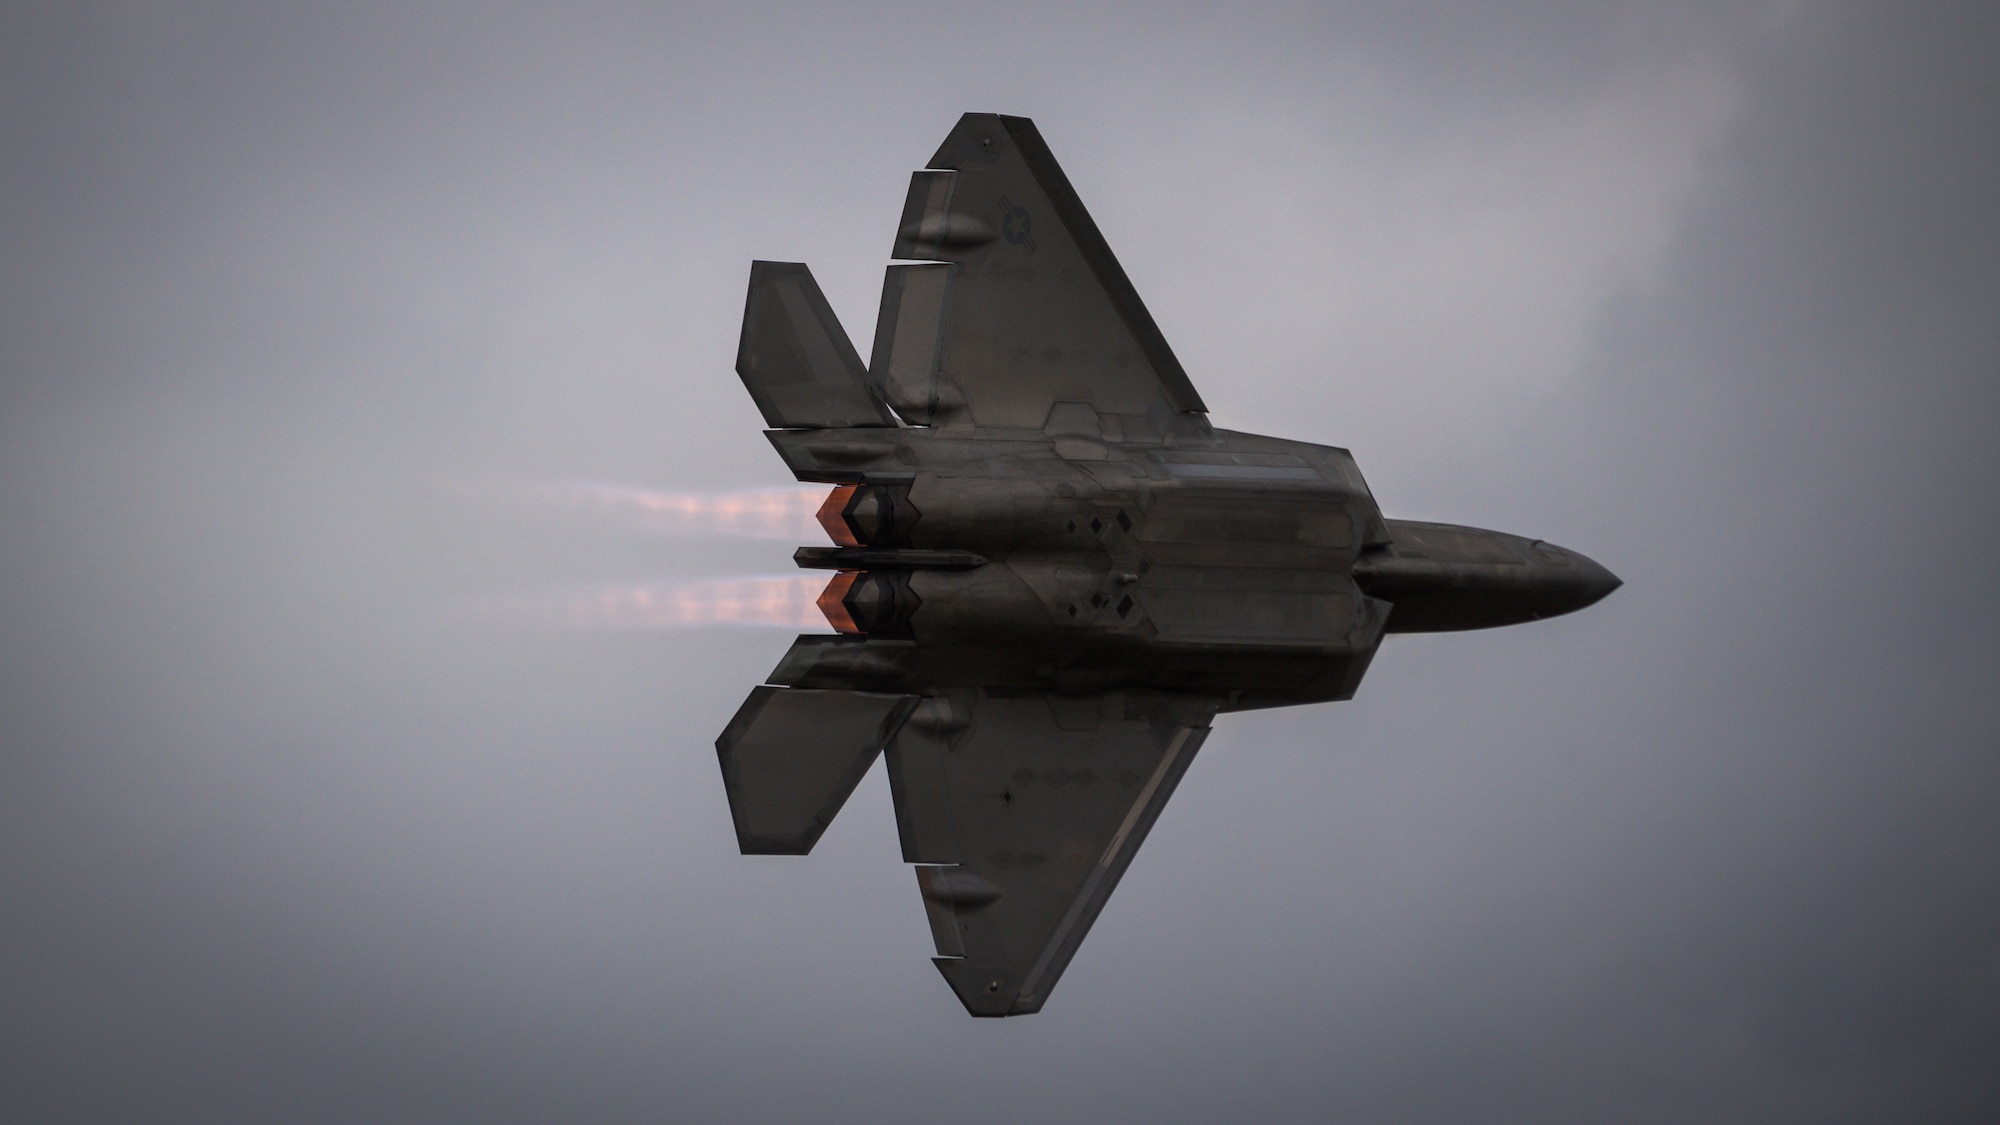 A U.S. Air Force F-22A Raptor performs aerial maneuvers during the 2021 Defenders of Liberty Air & Space Show at Barksdale Air Force Base, Louisiana, May 9, 2021. The Defenders of Liberty air show was first held in 1933 and is a full weekend of military and civilian aircraft, with performances and displays. (U.S. Air Force photo by Senior Airman Max Miller)